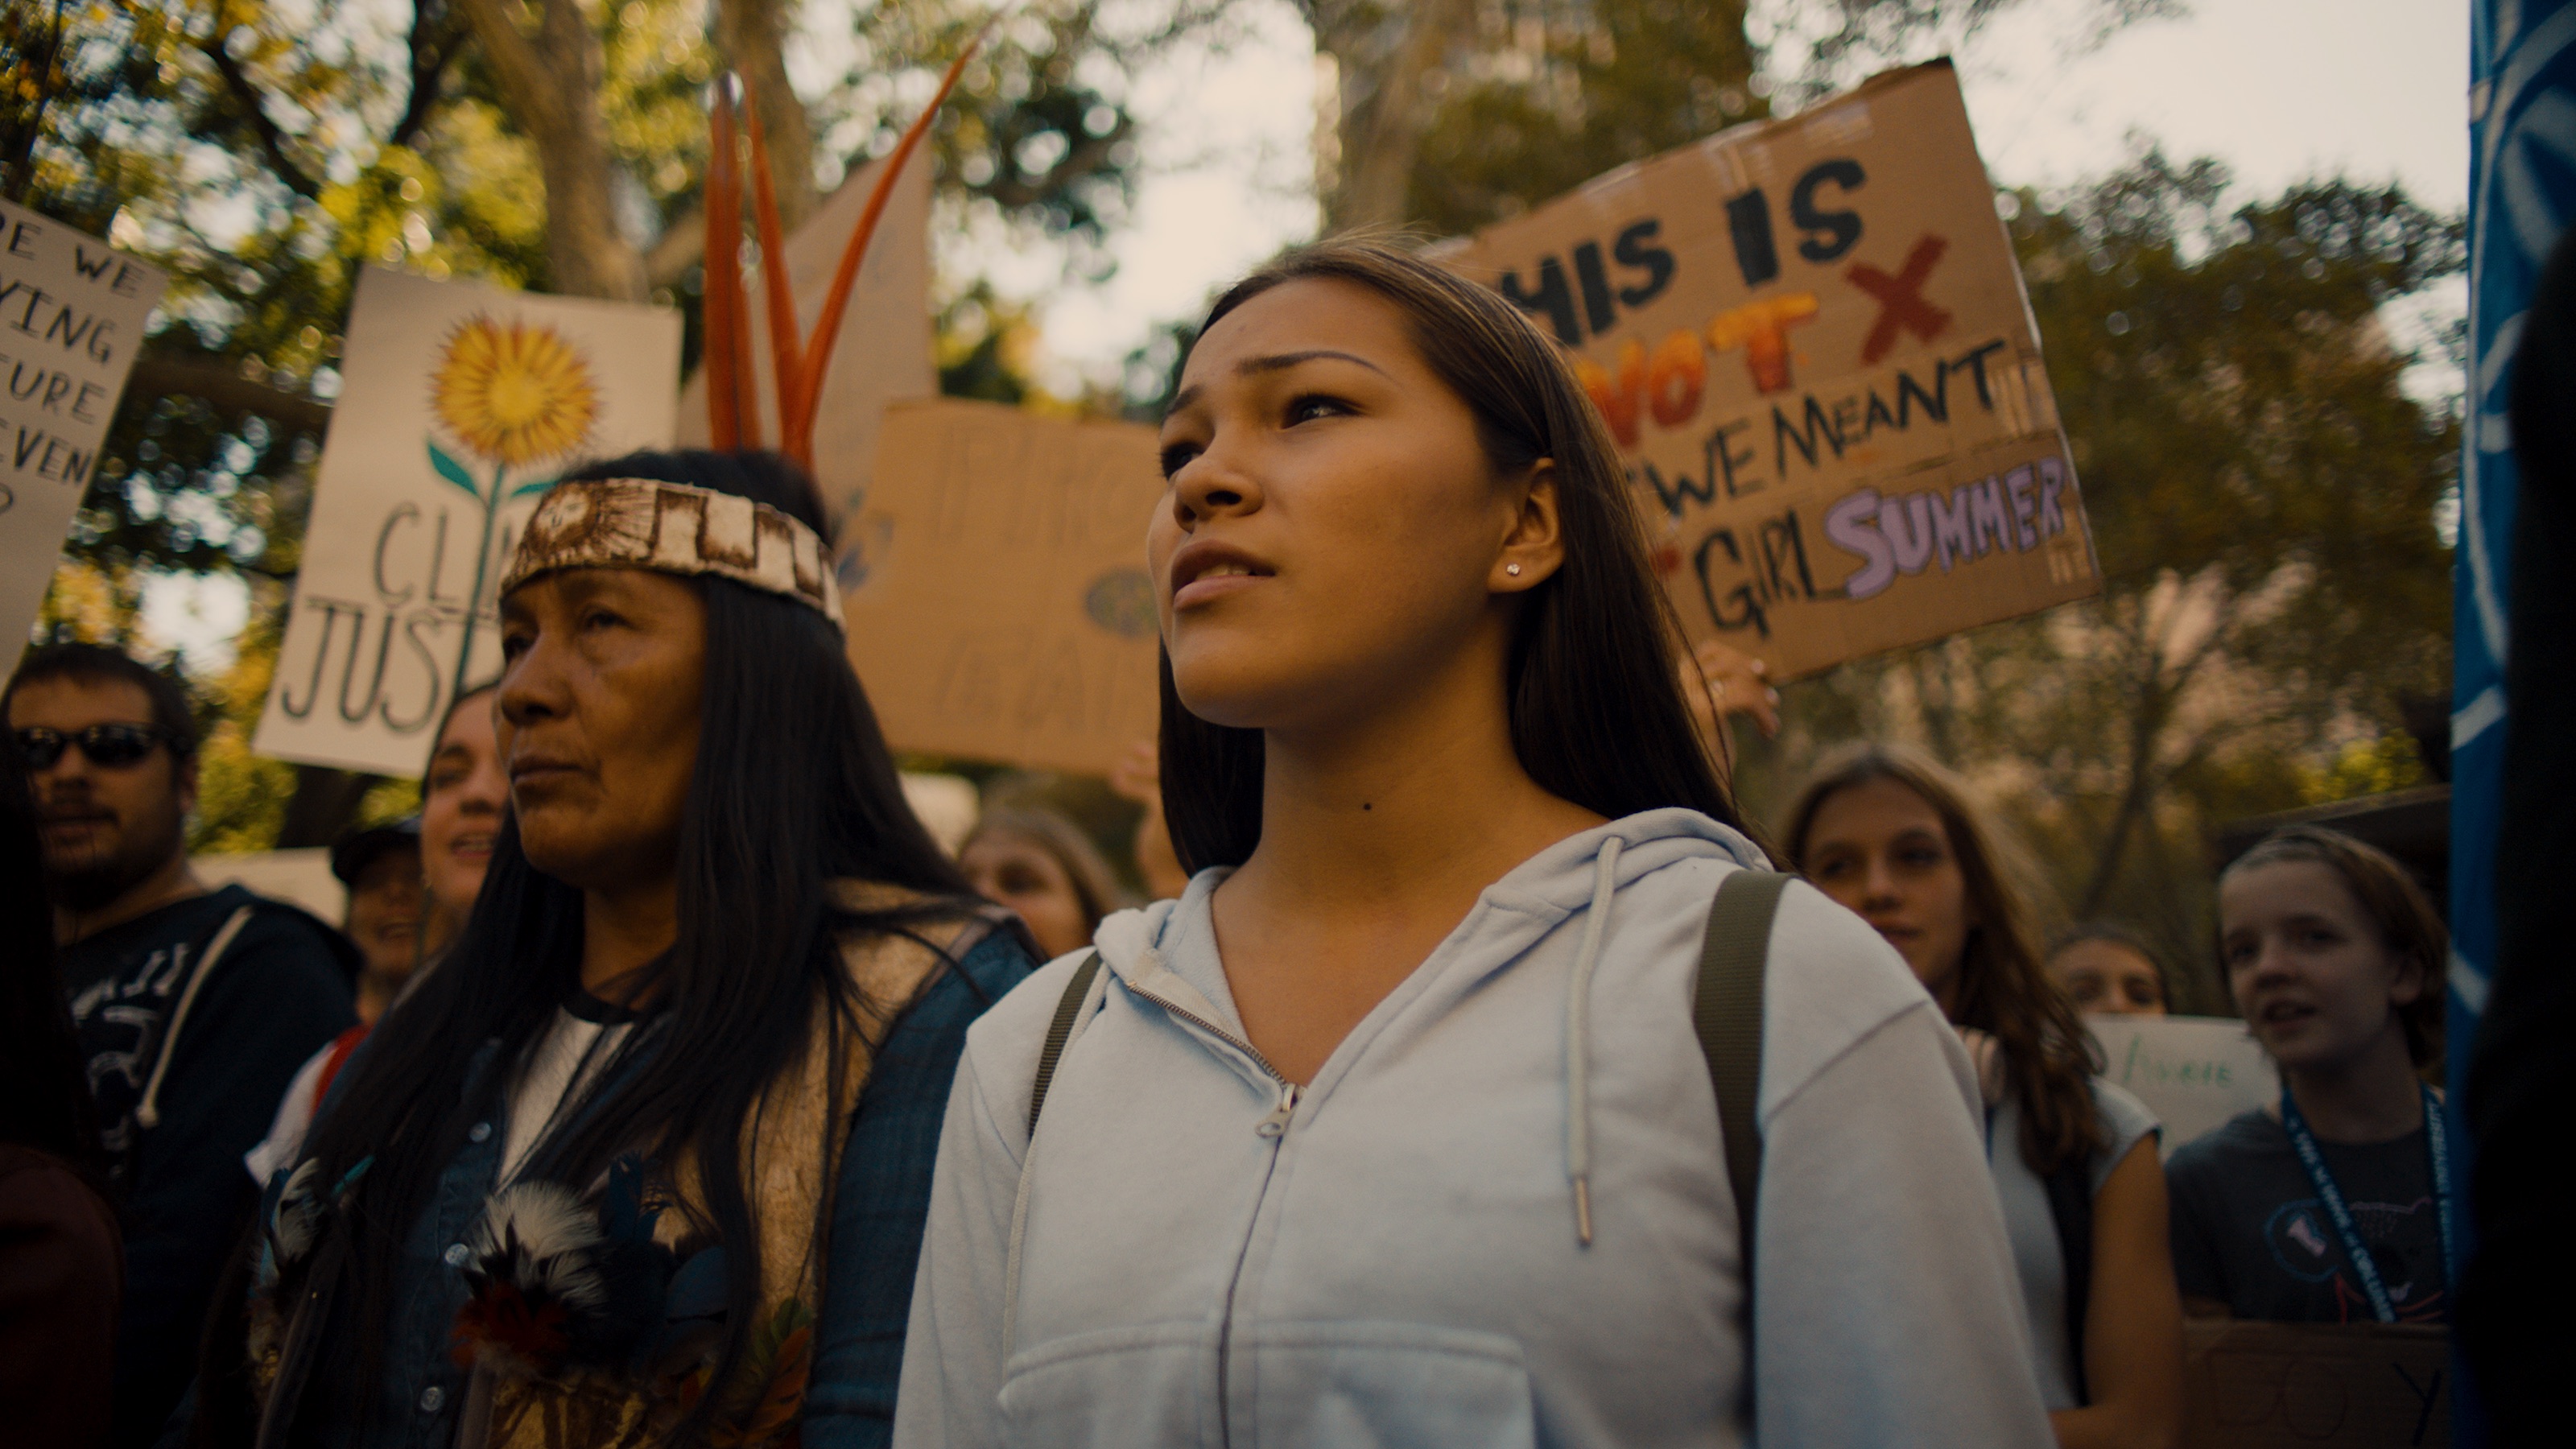 STEVIE SALAS ON THE WATER WALKER WITH INSPIRING YOUTH AUTUMN PELTIER